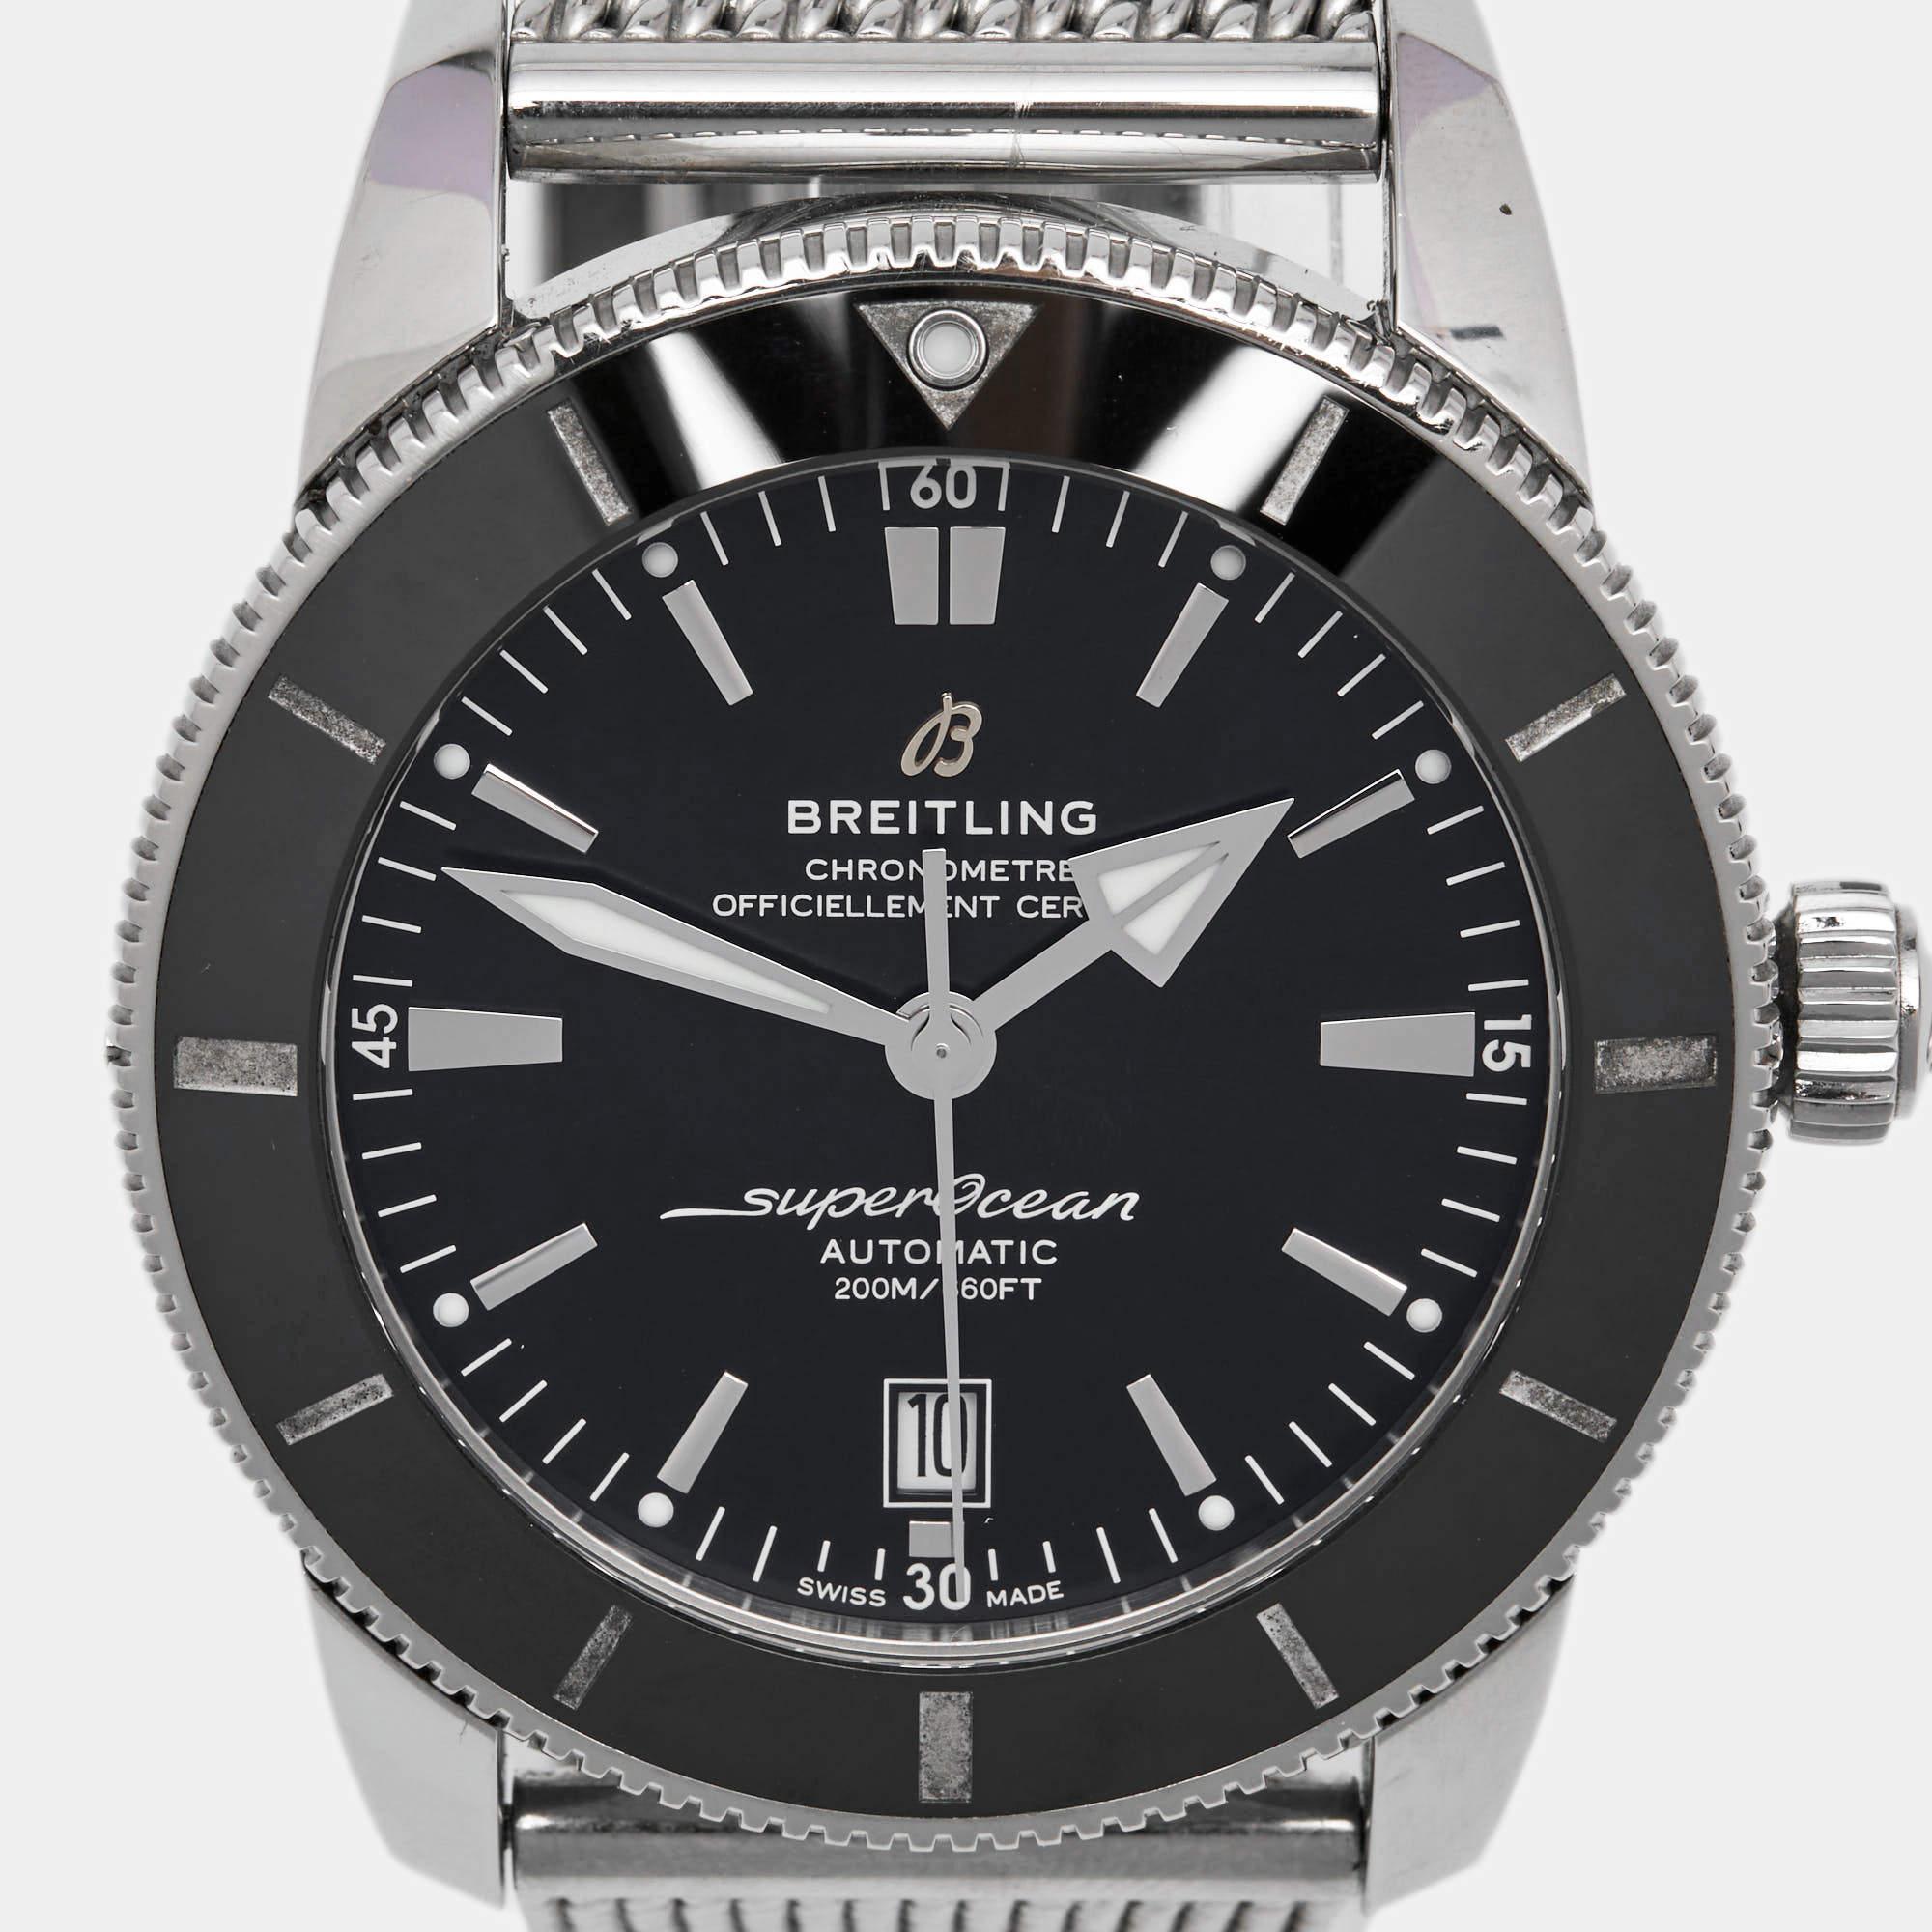 The charm of a finely crafted wristwatch accompanies the wearer through the years and to any occasion they have a date for. It is this charm, infused with timeless luxury, that makes this Breitling wristwatch such an incredible pick.

